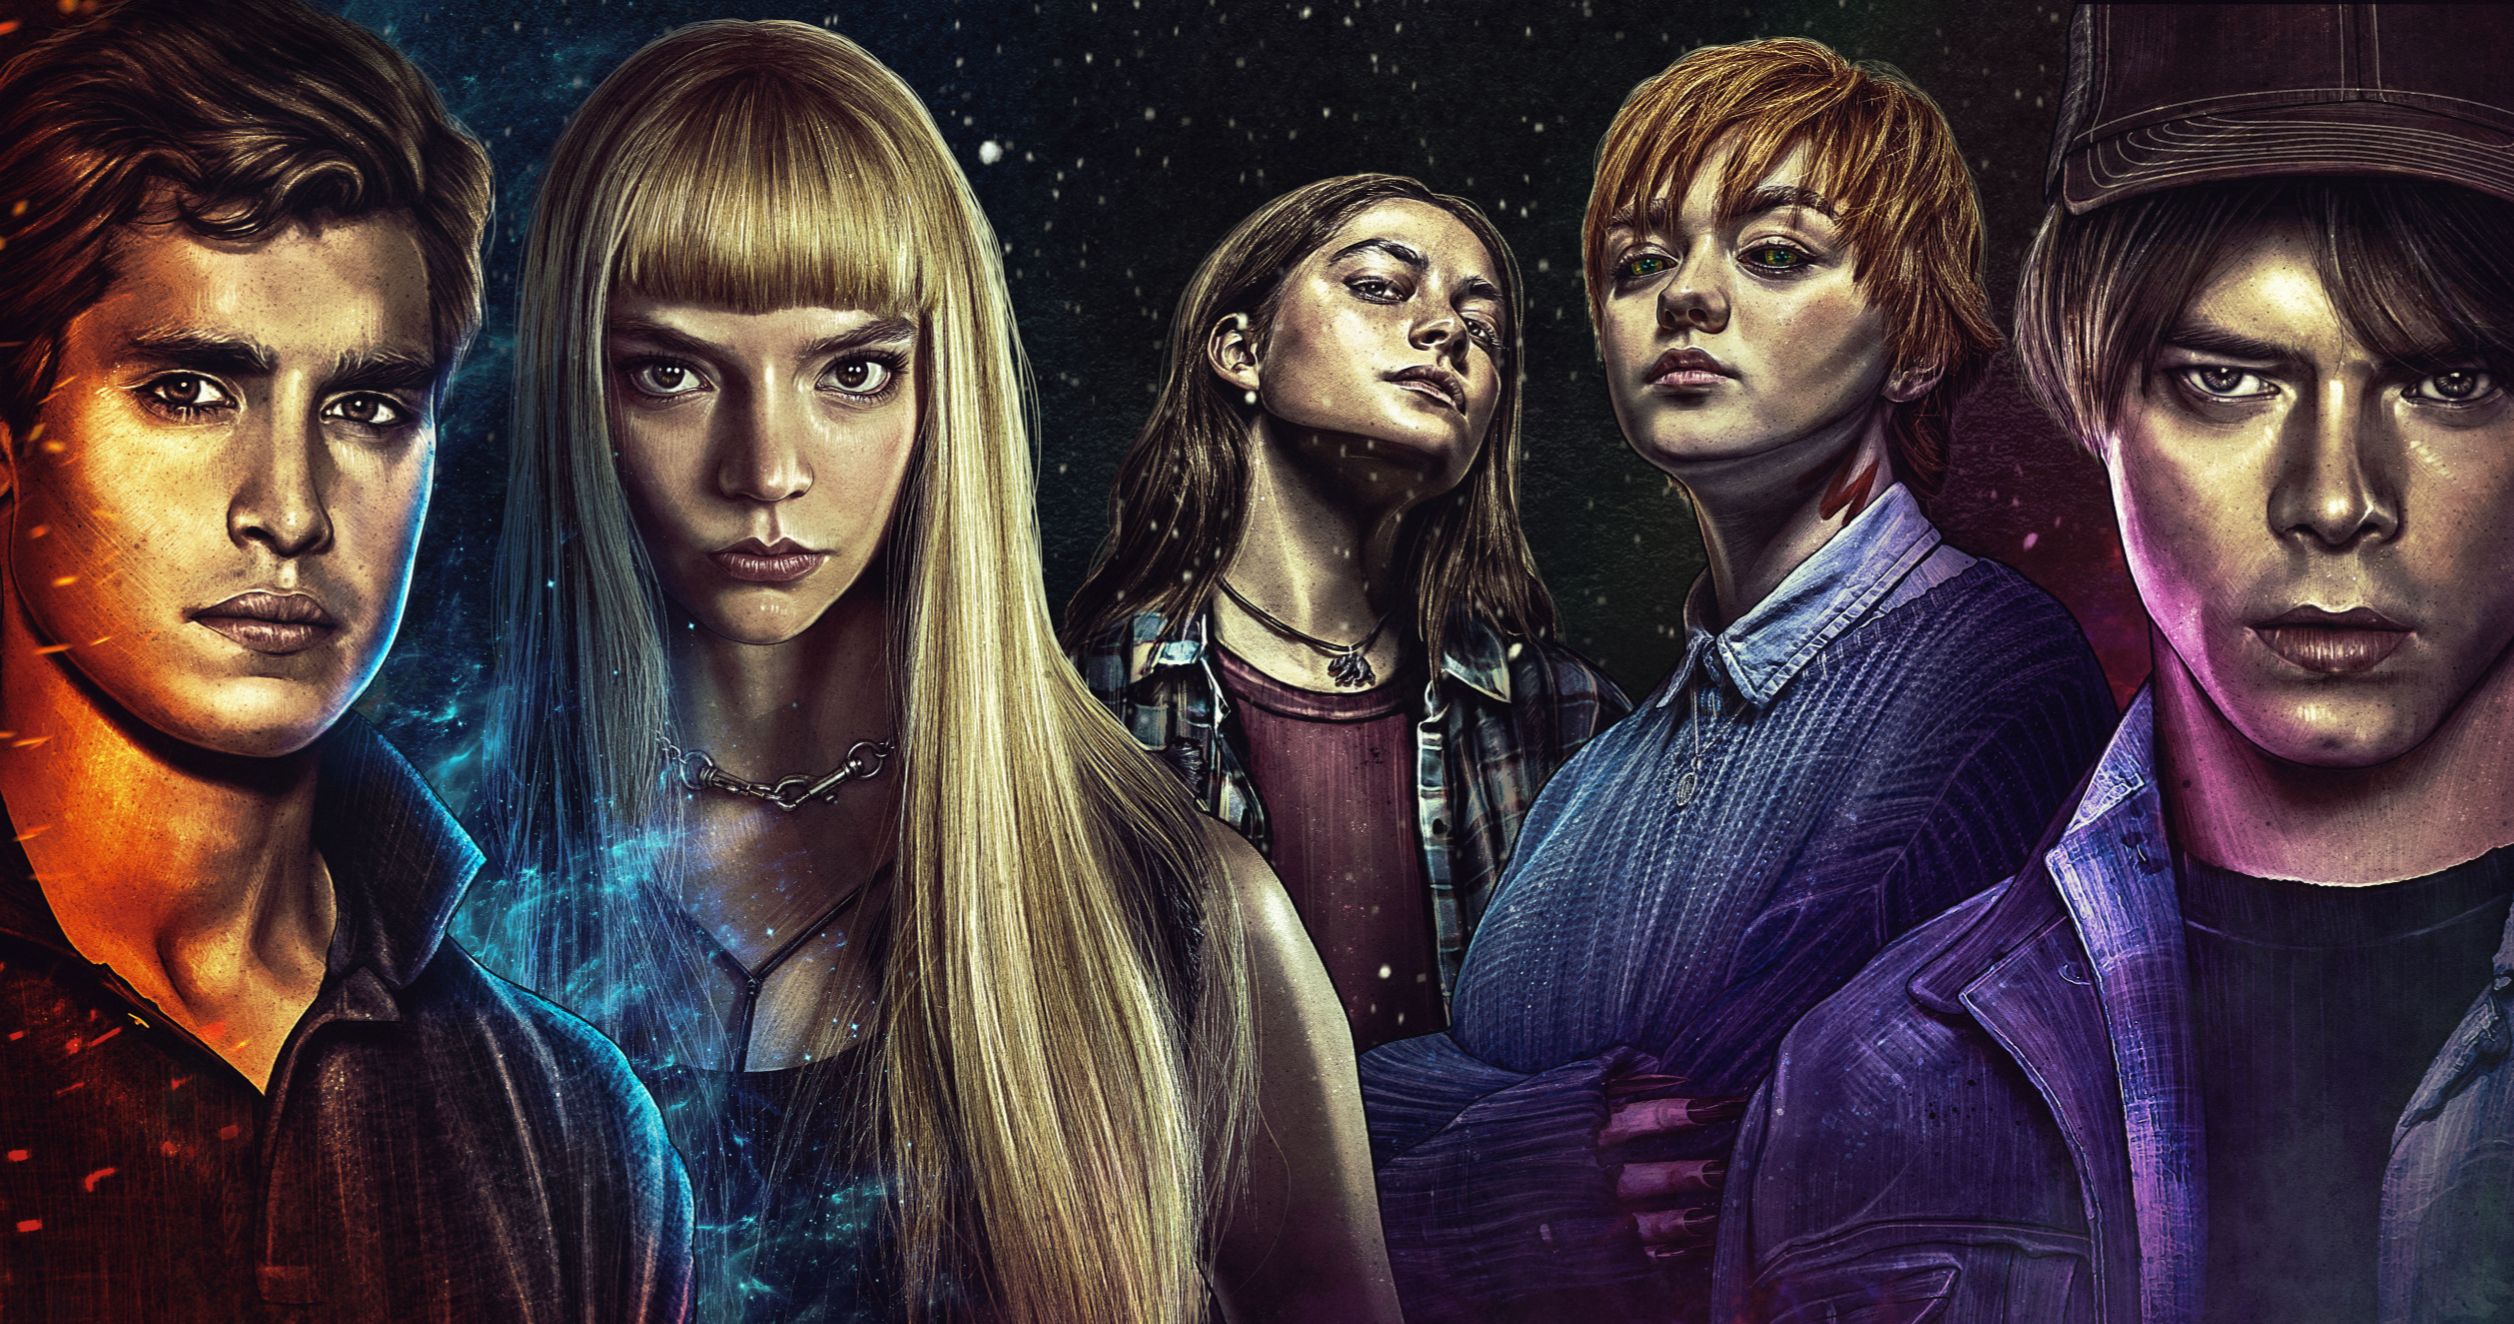 The New Mutants” ComicCon@Home Panel, Posters and Twitter Emojis